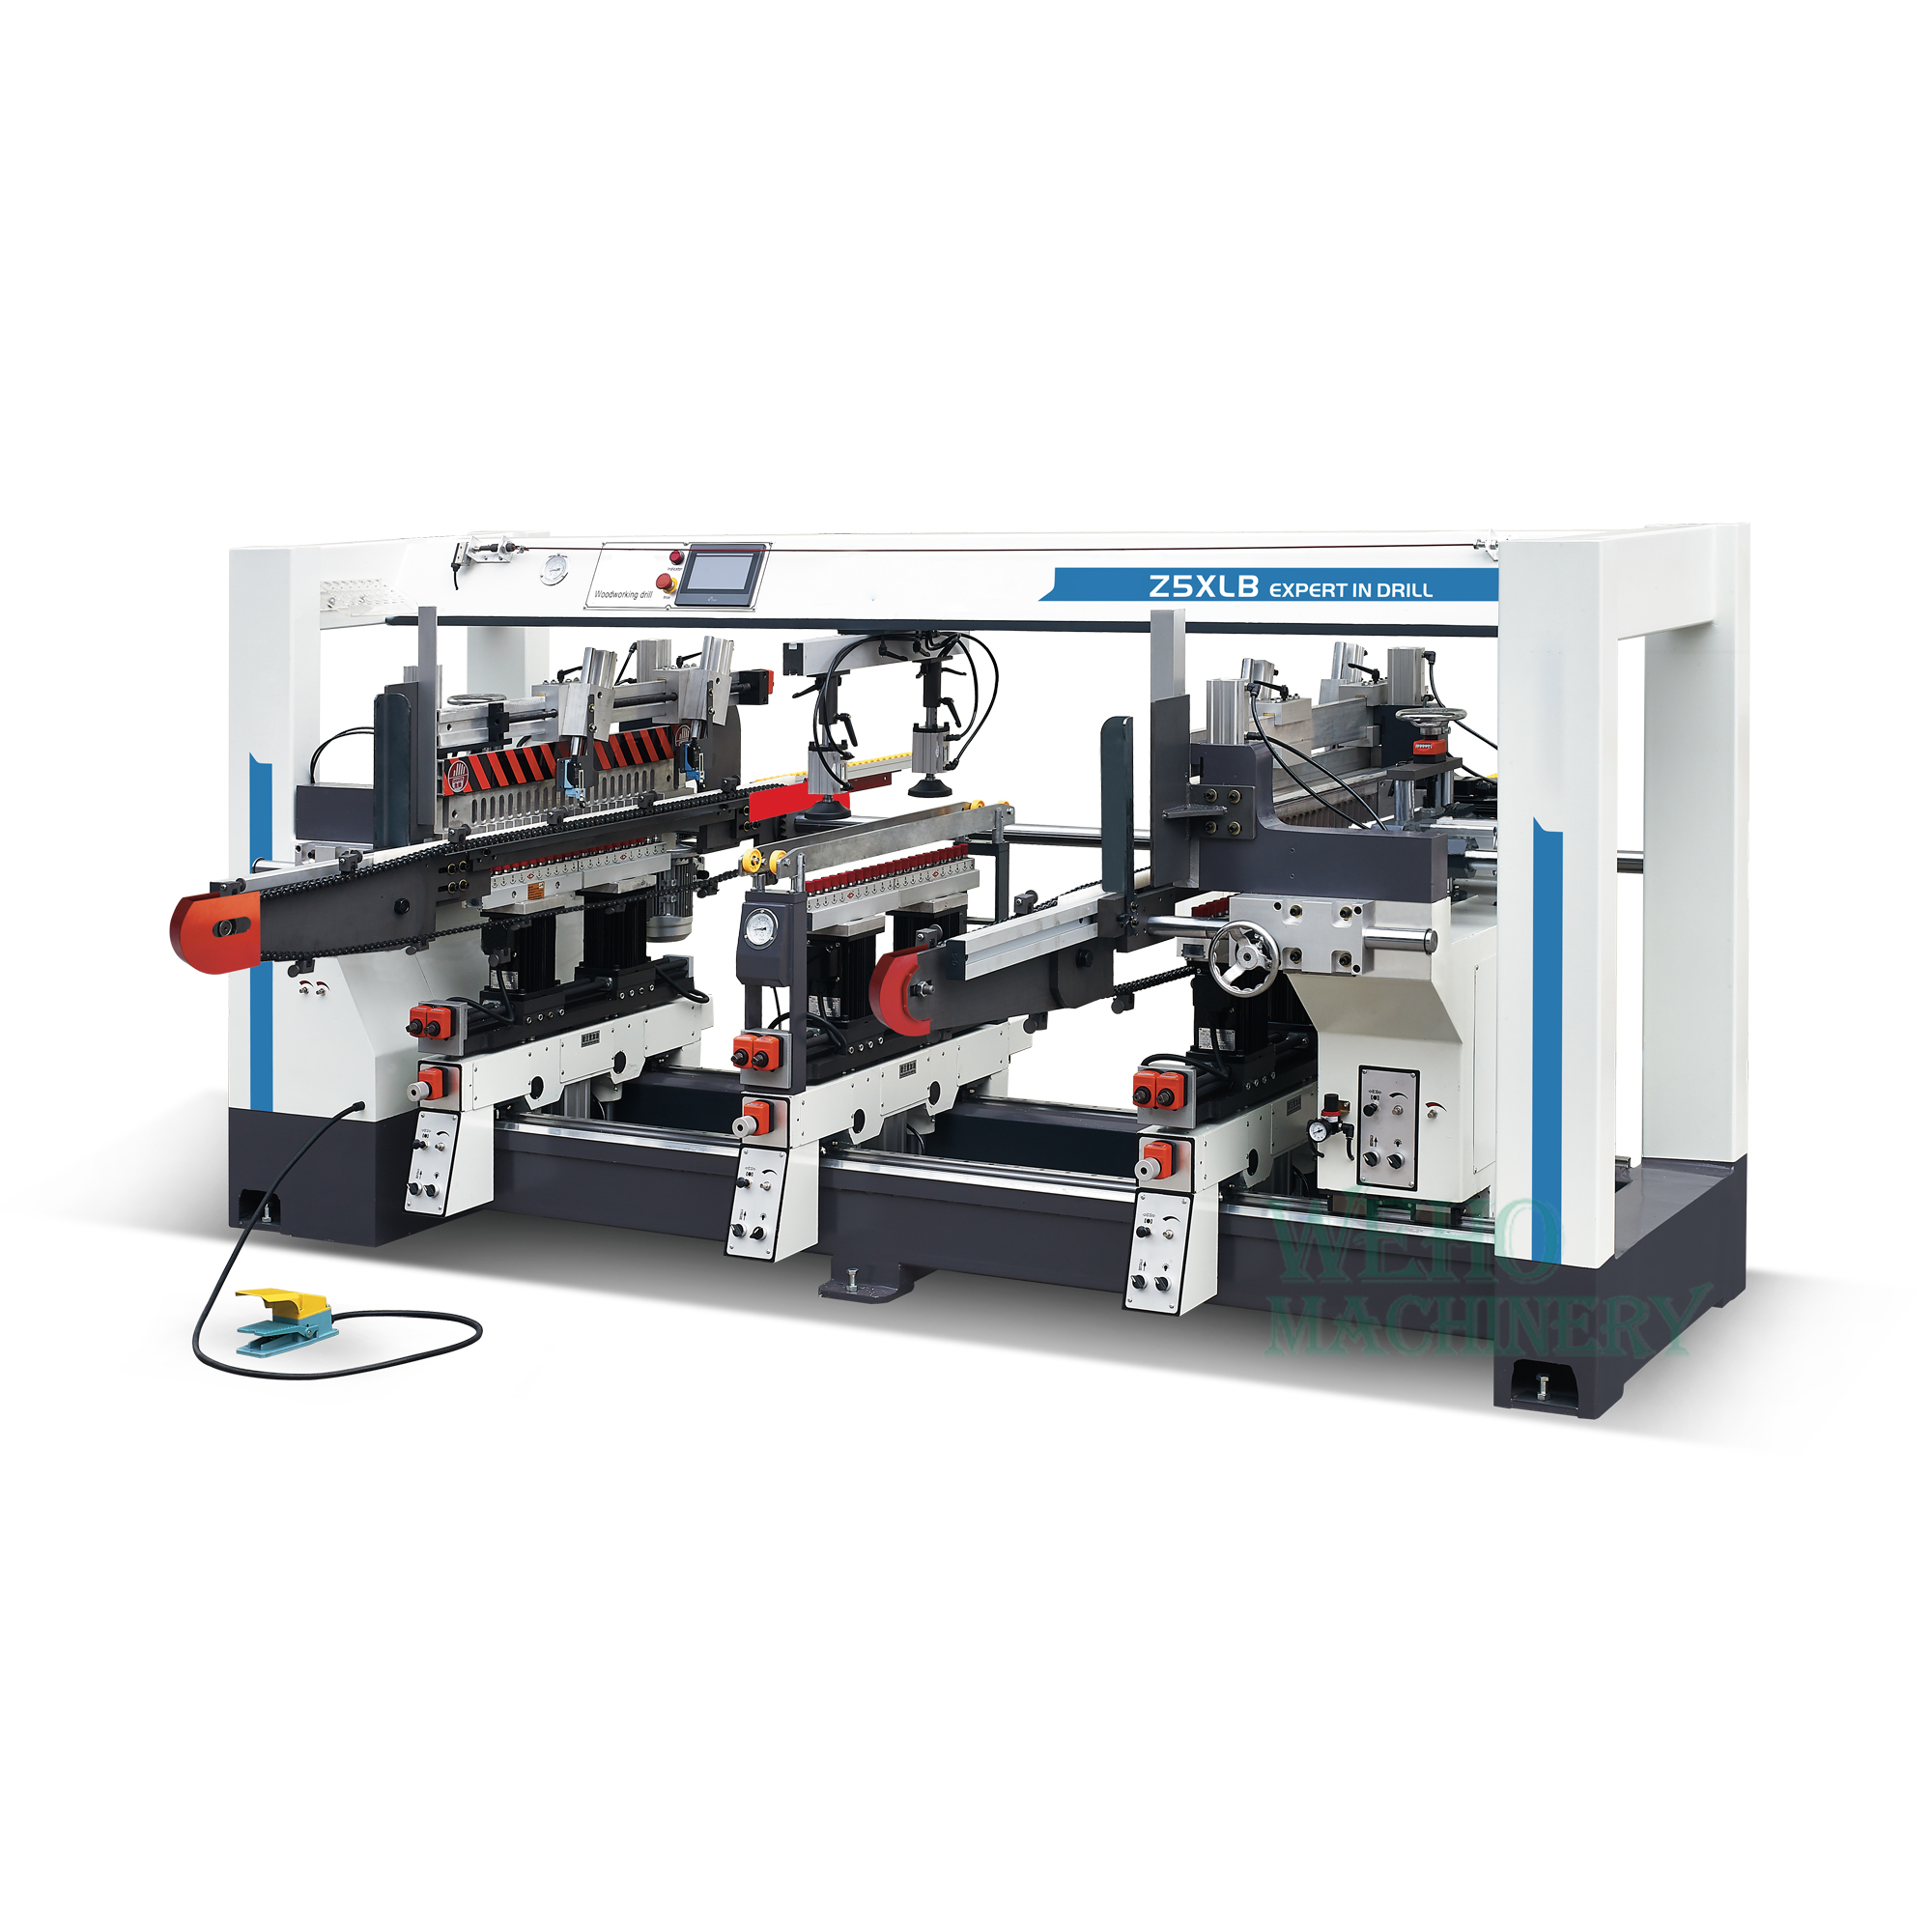 Five-row multi spindles boring machine with double positioning